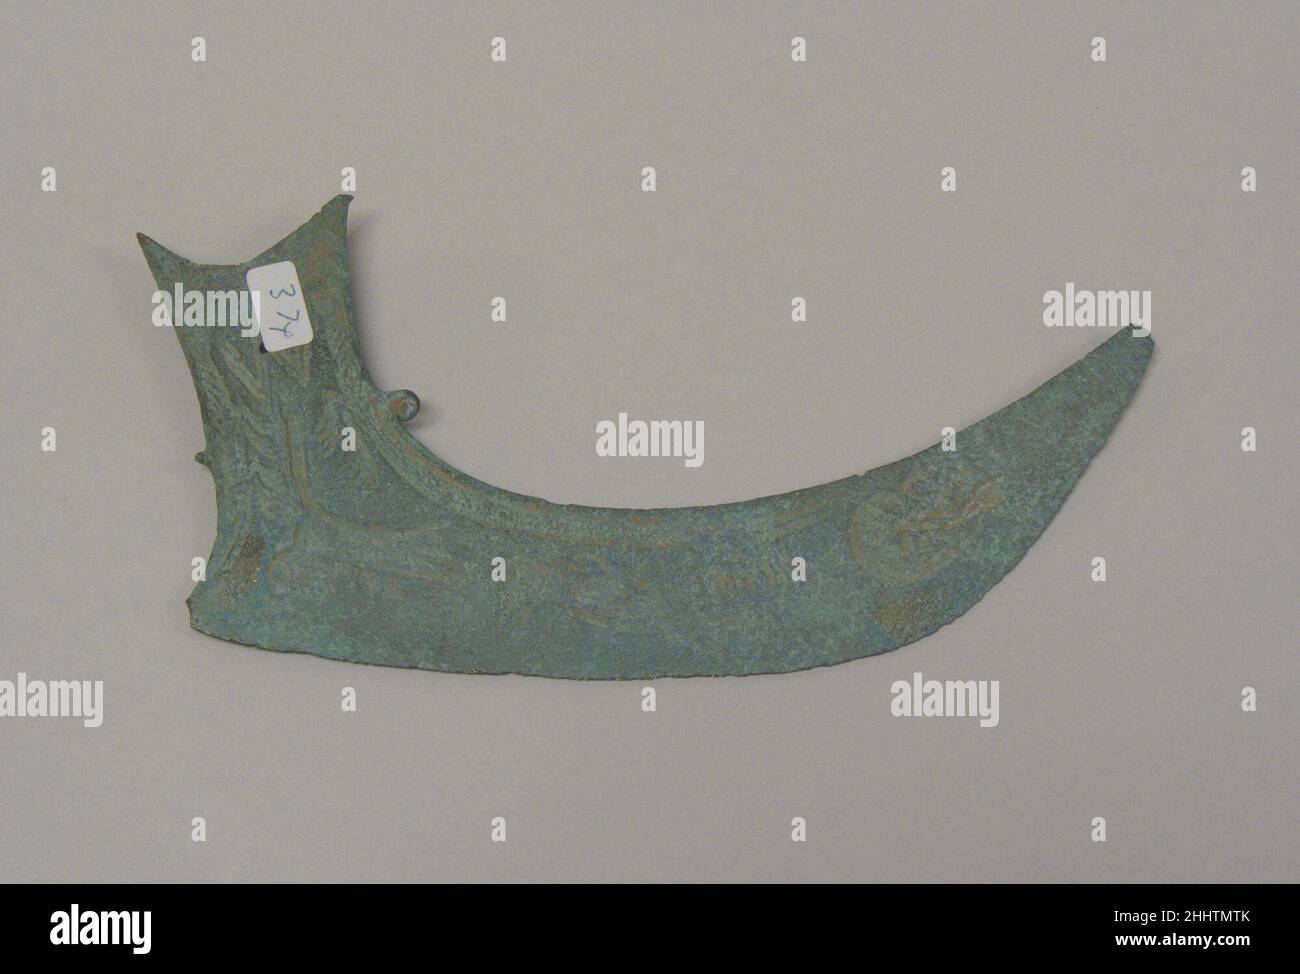 Boat-Shaped Hafted Ax 500 B.C.–A.D. 300 Vietnam (North). Boat-Shaped Hafted Ax. Vietnam (North). 500 B.C.–A.D. 300. Bronze. Bronze and Iron Age period, Dongson culture. Metalwork Stock Photo